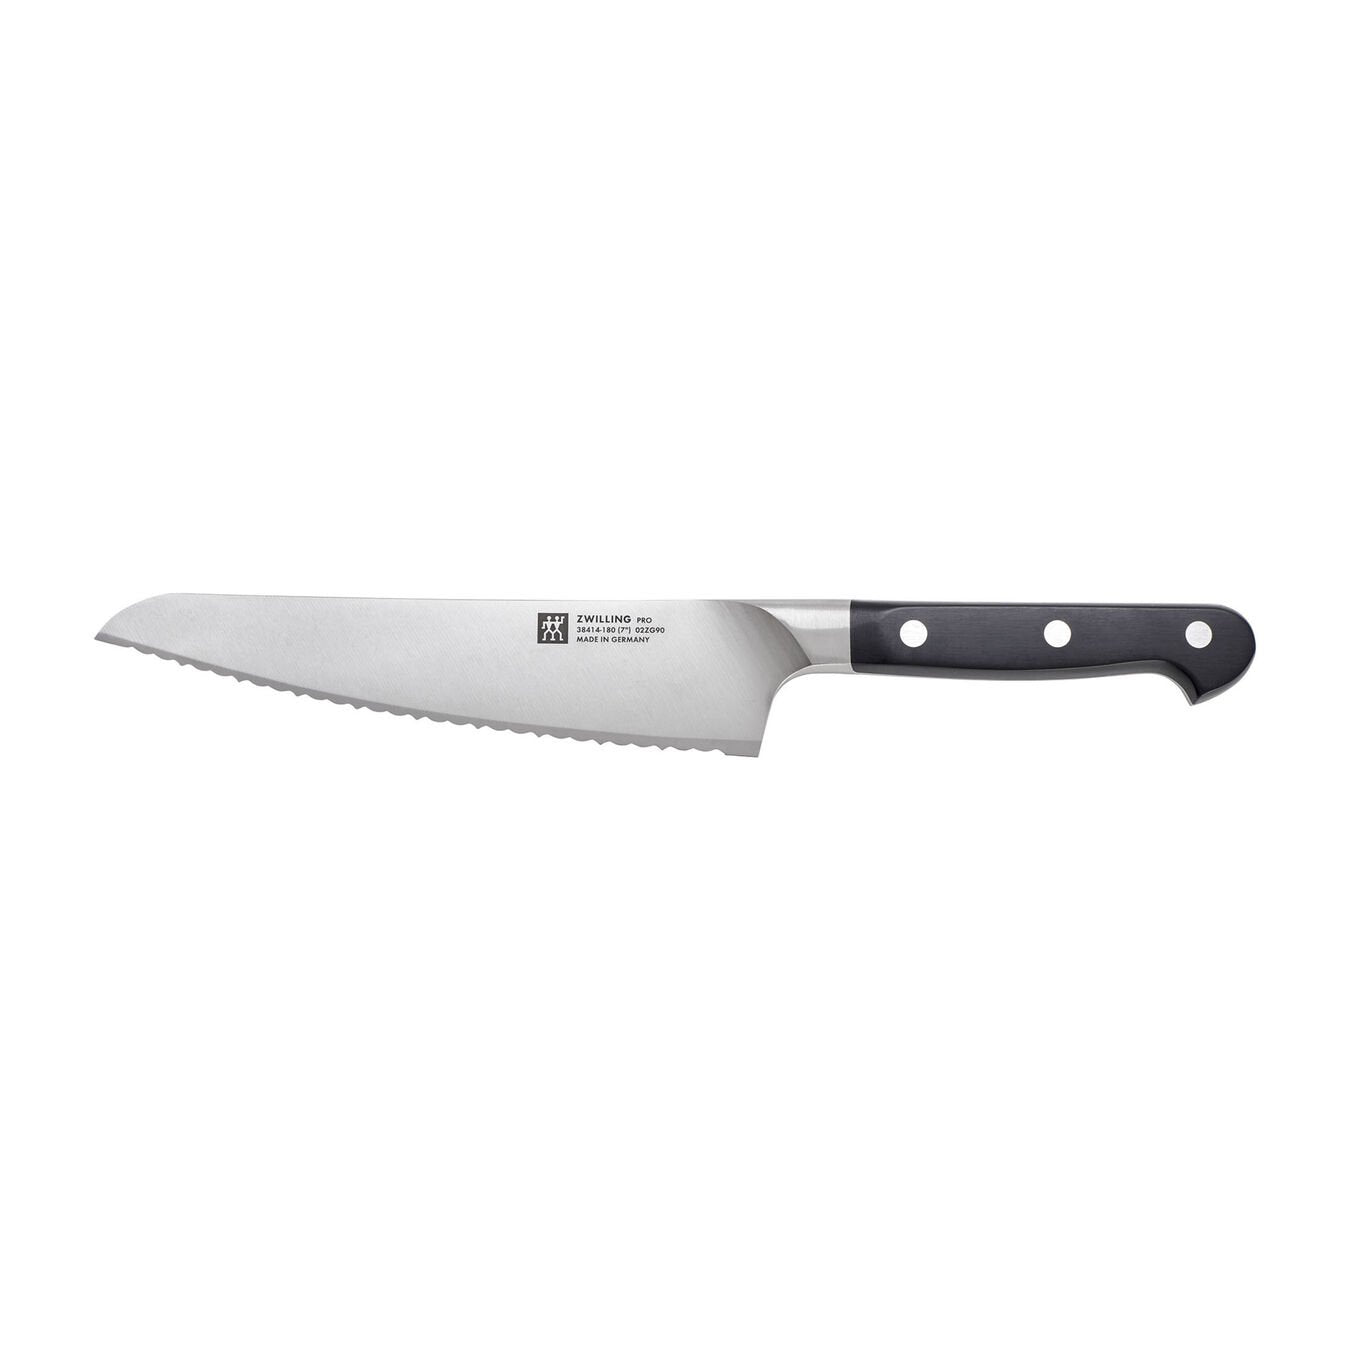 Pro 7 Inch Bread Knife with black, riveted handle on a white background.